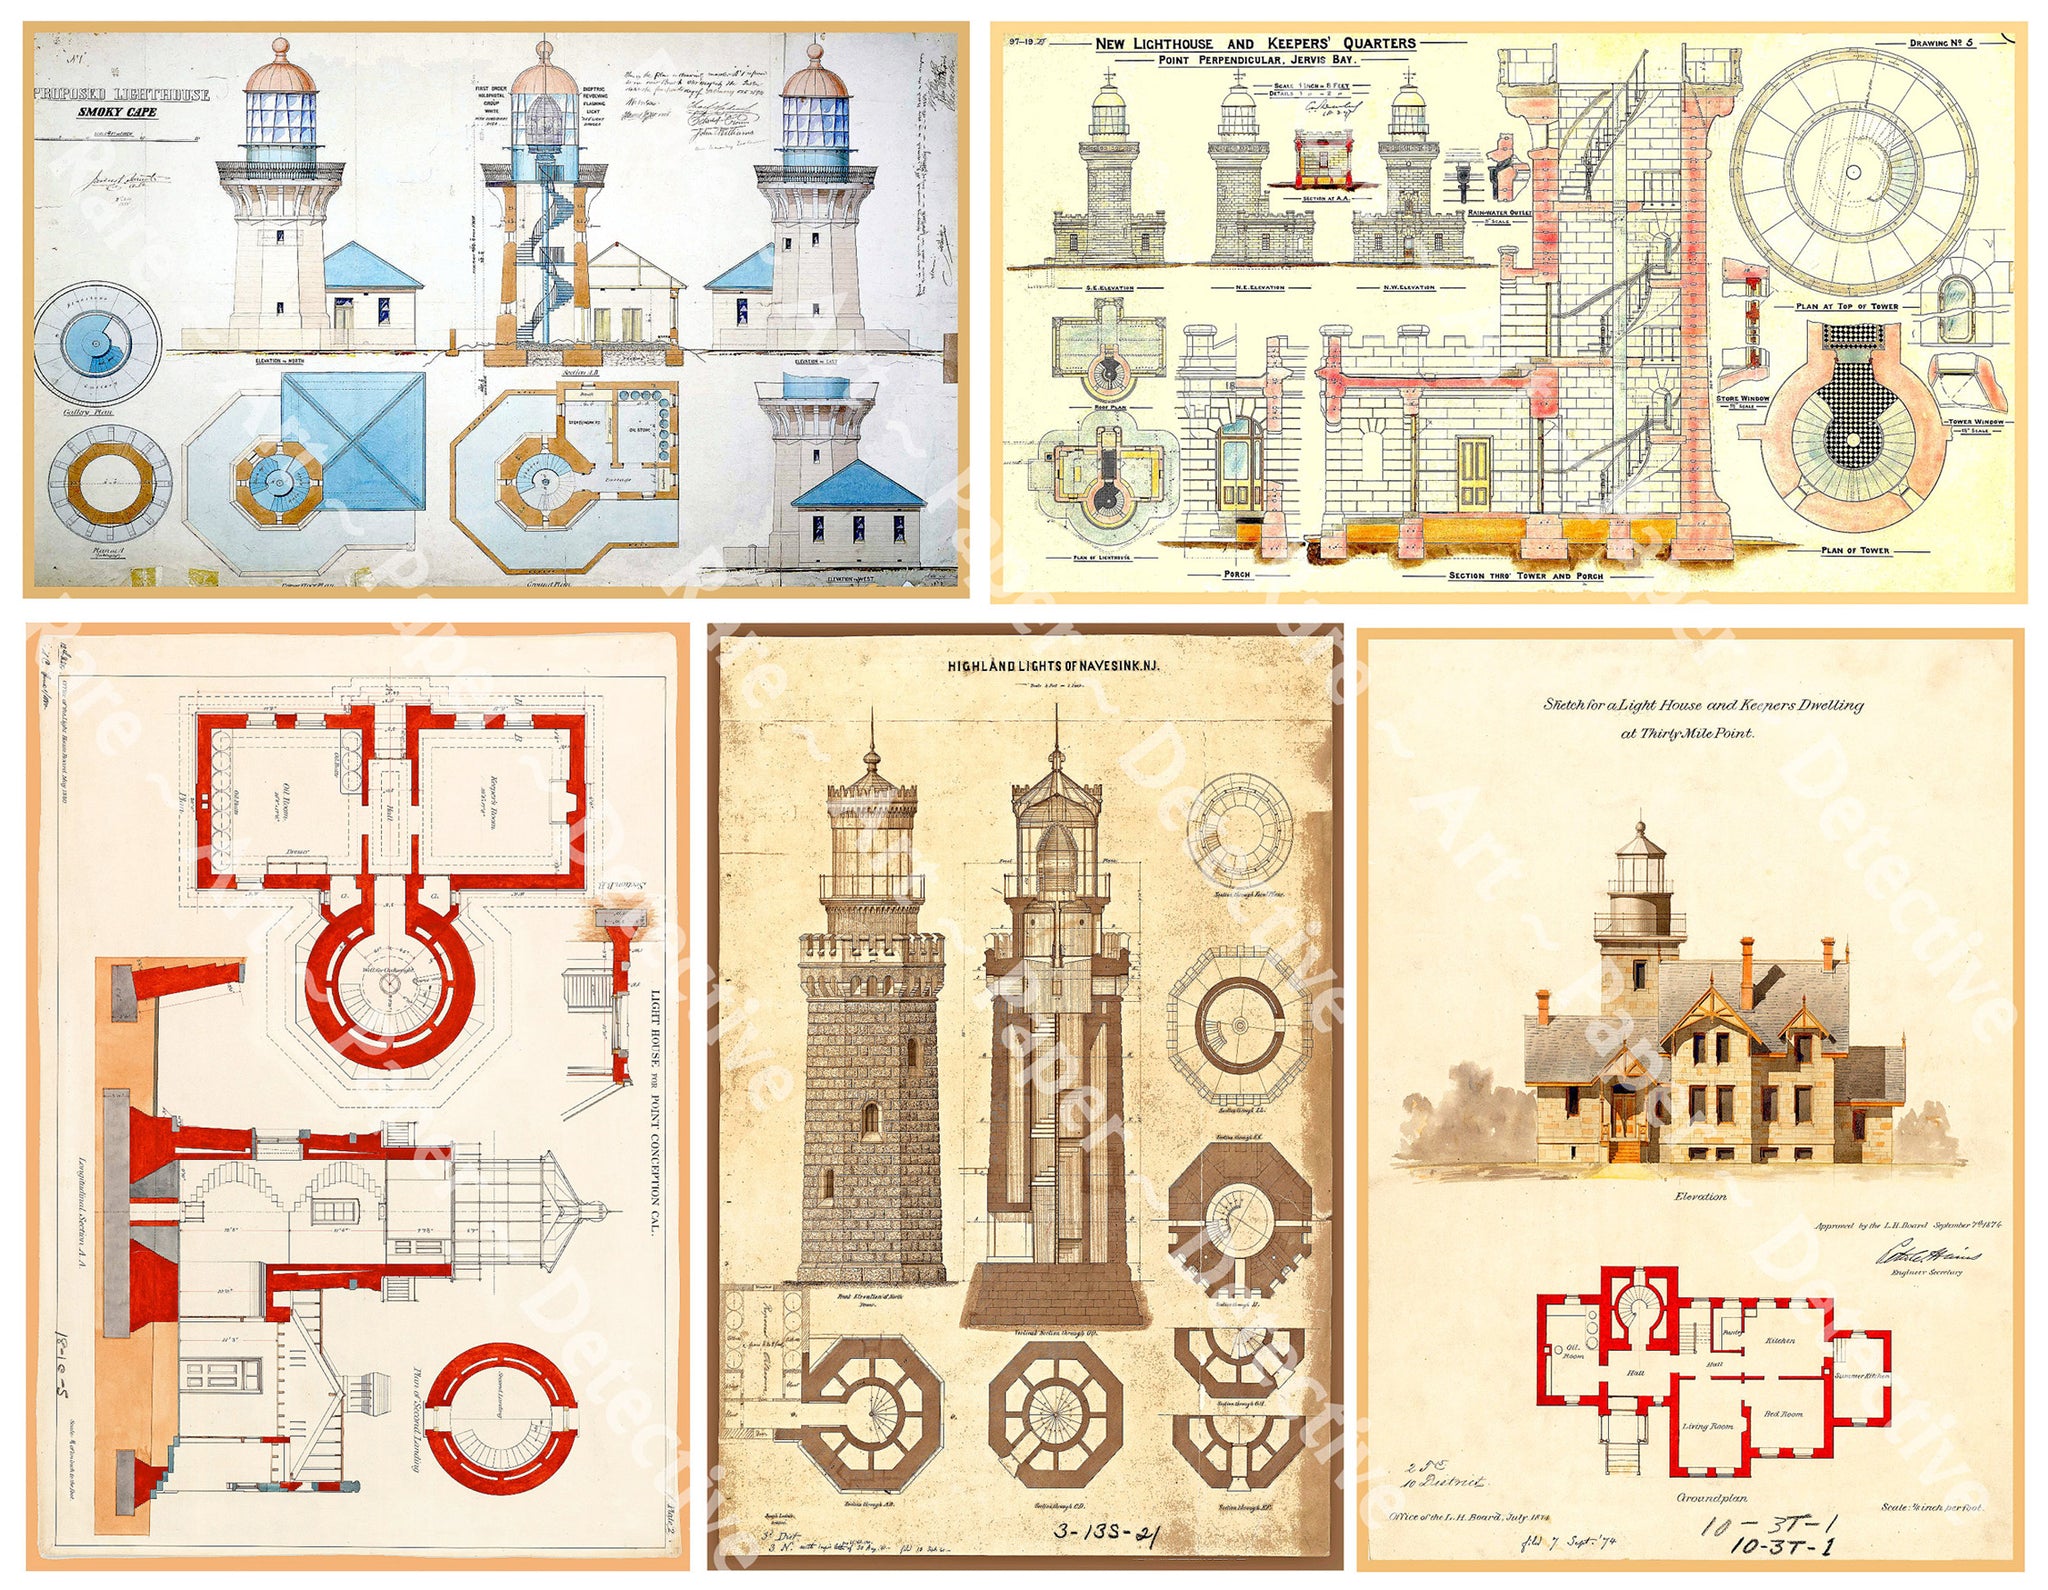 Lighthouse Architecture Stickers, Antique Lighthouse Diagram Drawings, Coastal Art and Nautical Collage Illustrations, CUT & PEEL Sheet, 1190